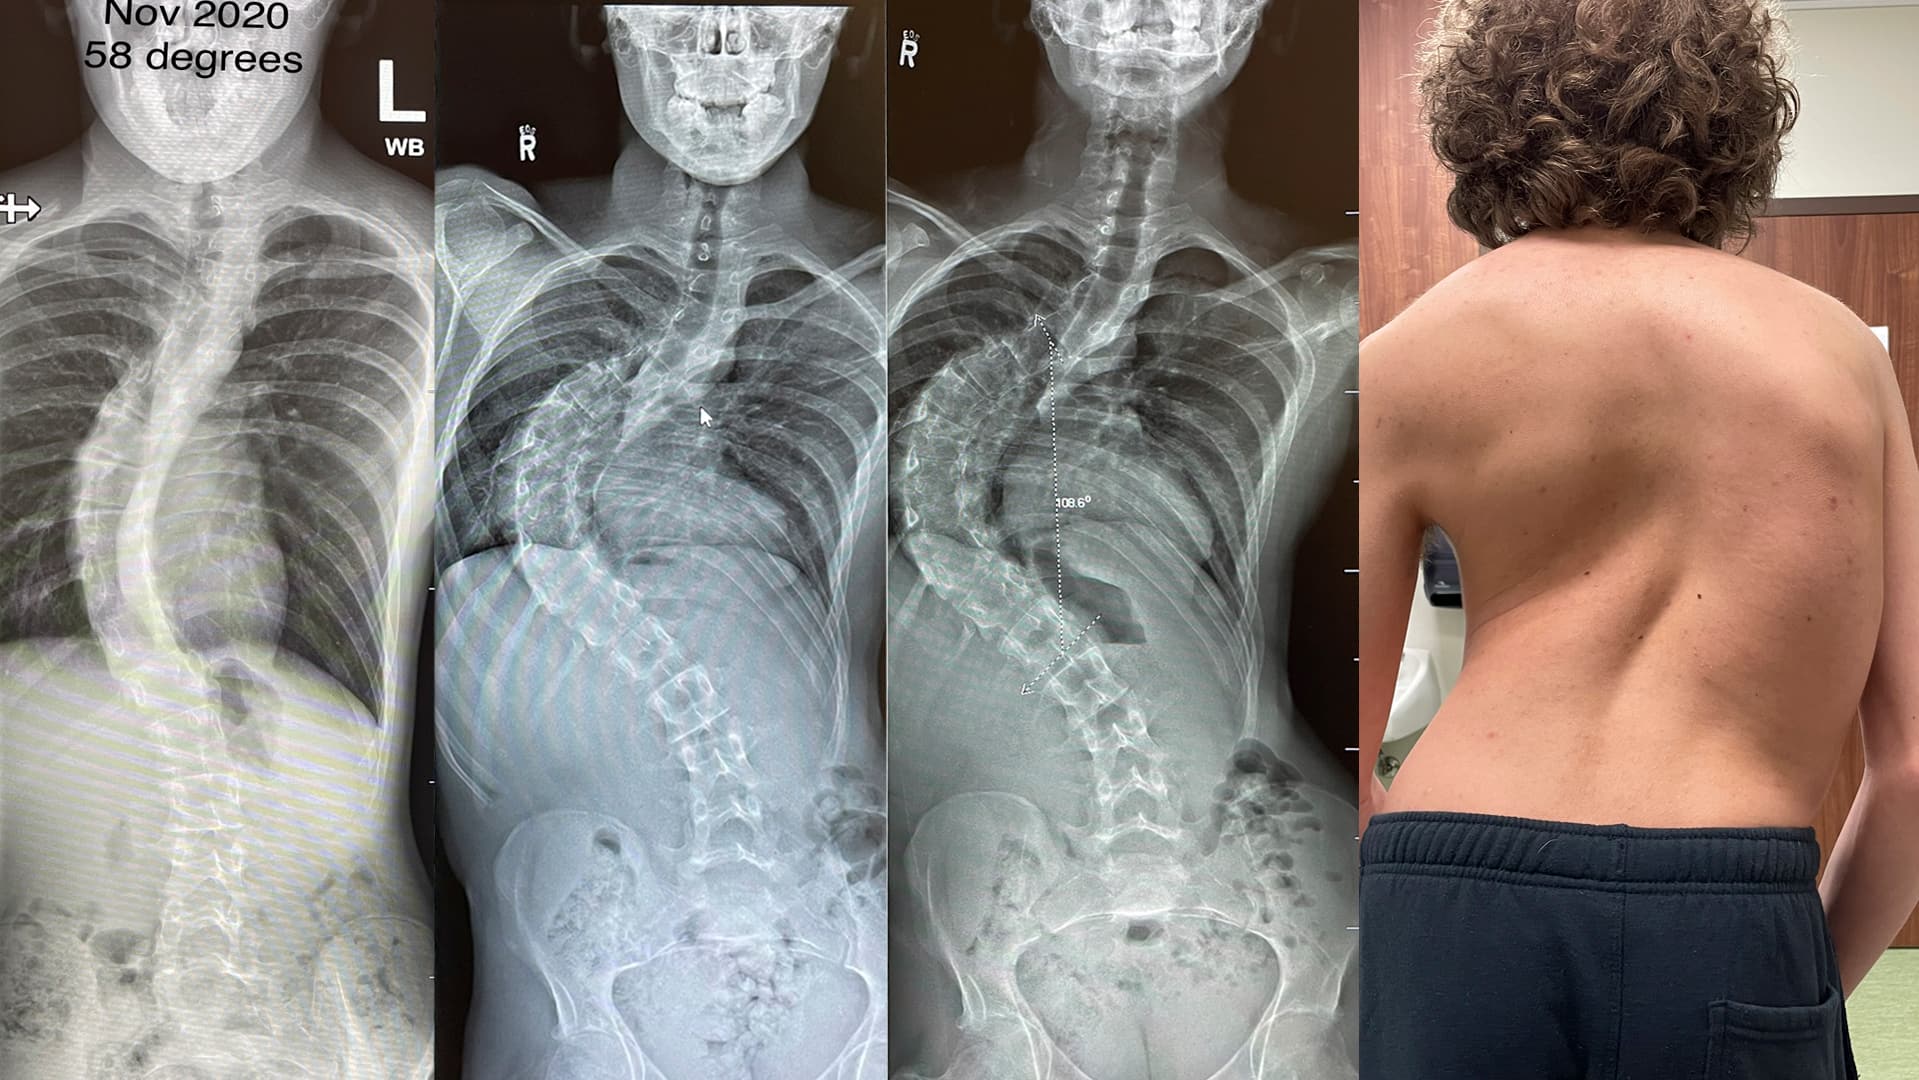 b c teenager waited almost 2 years for scoliosis surgery 1